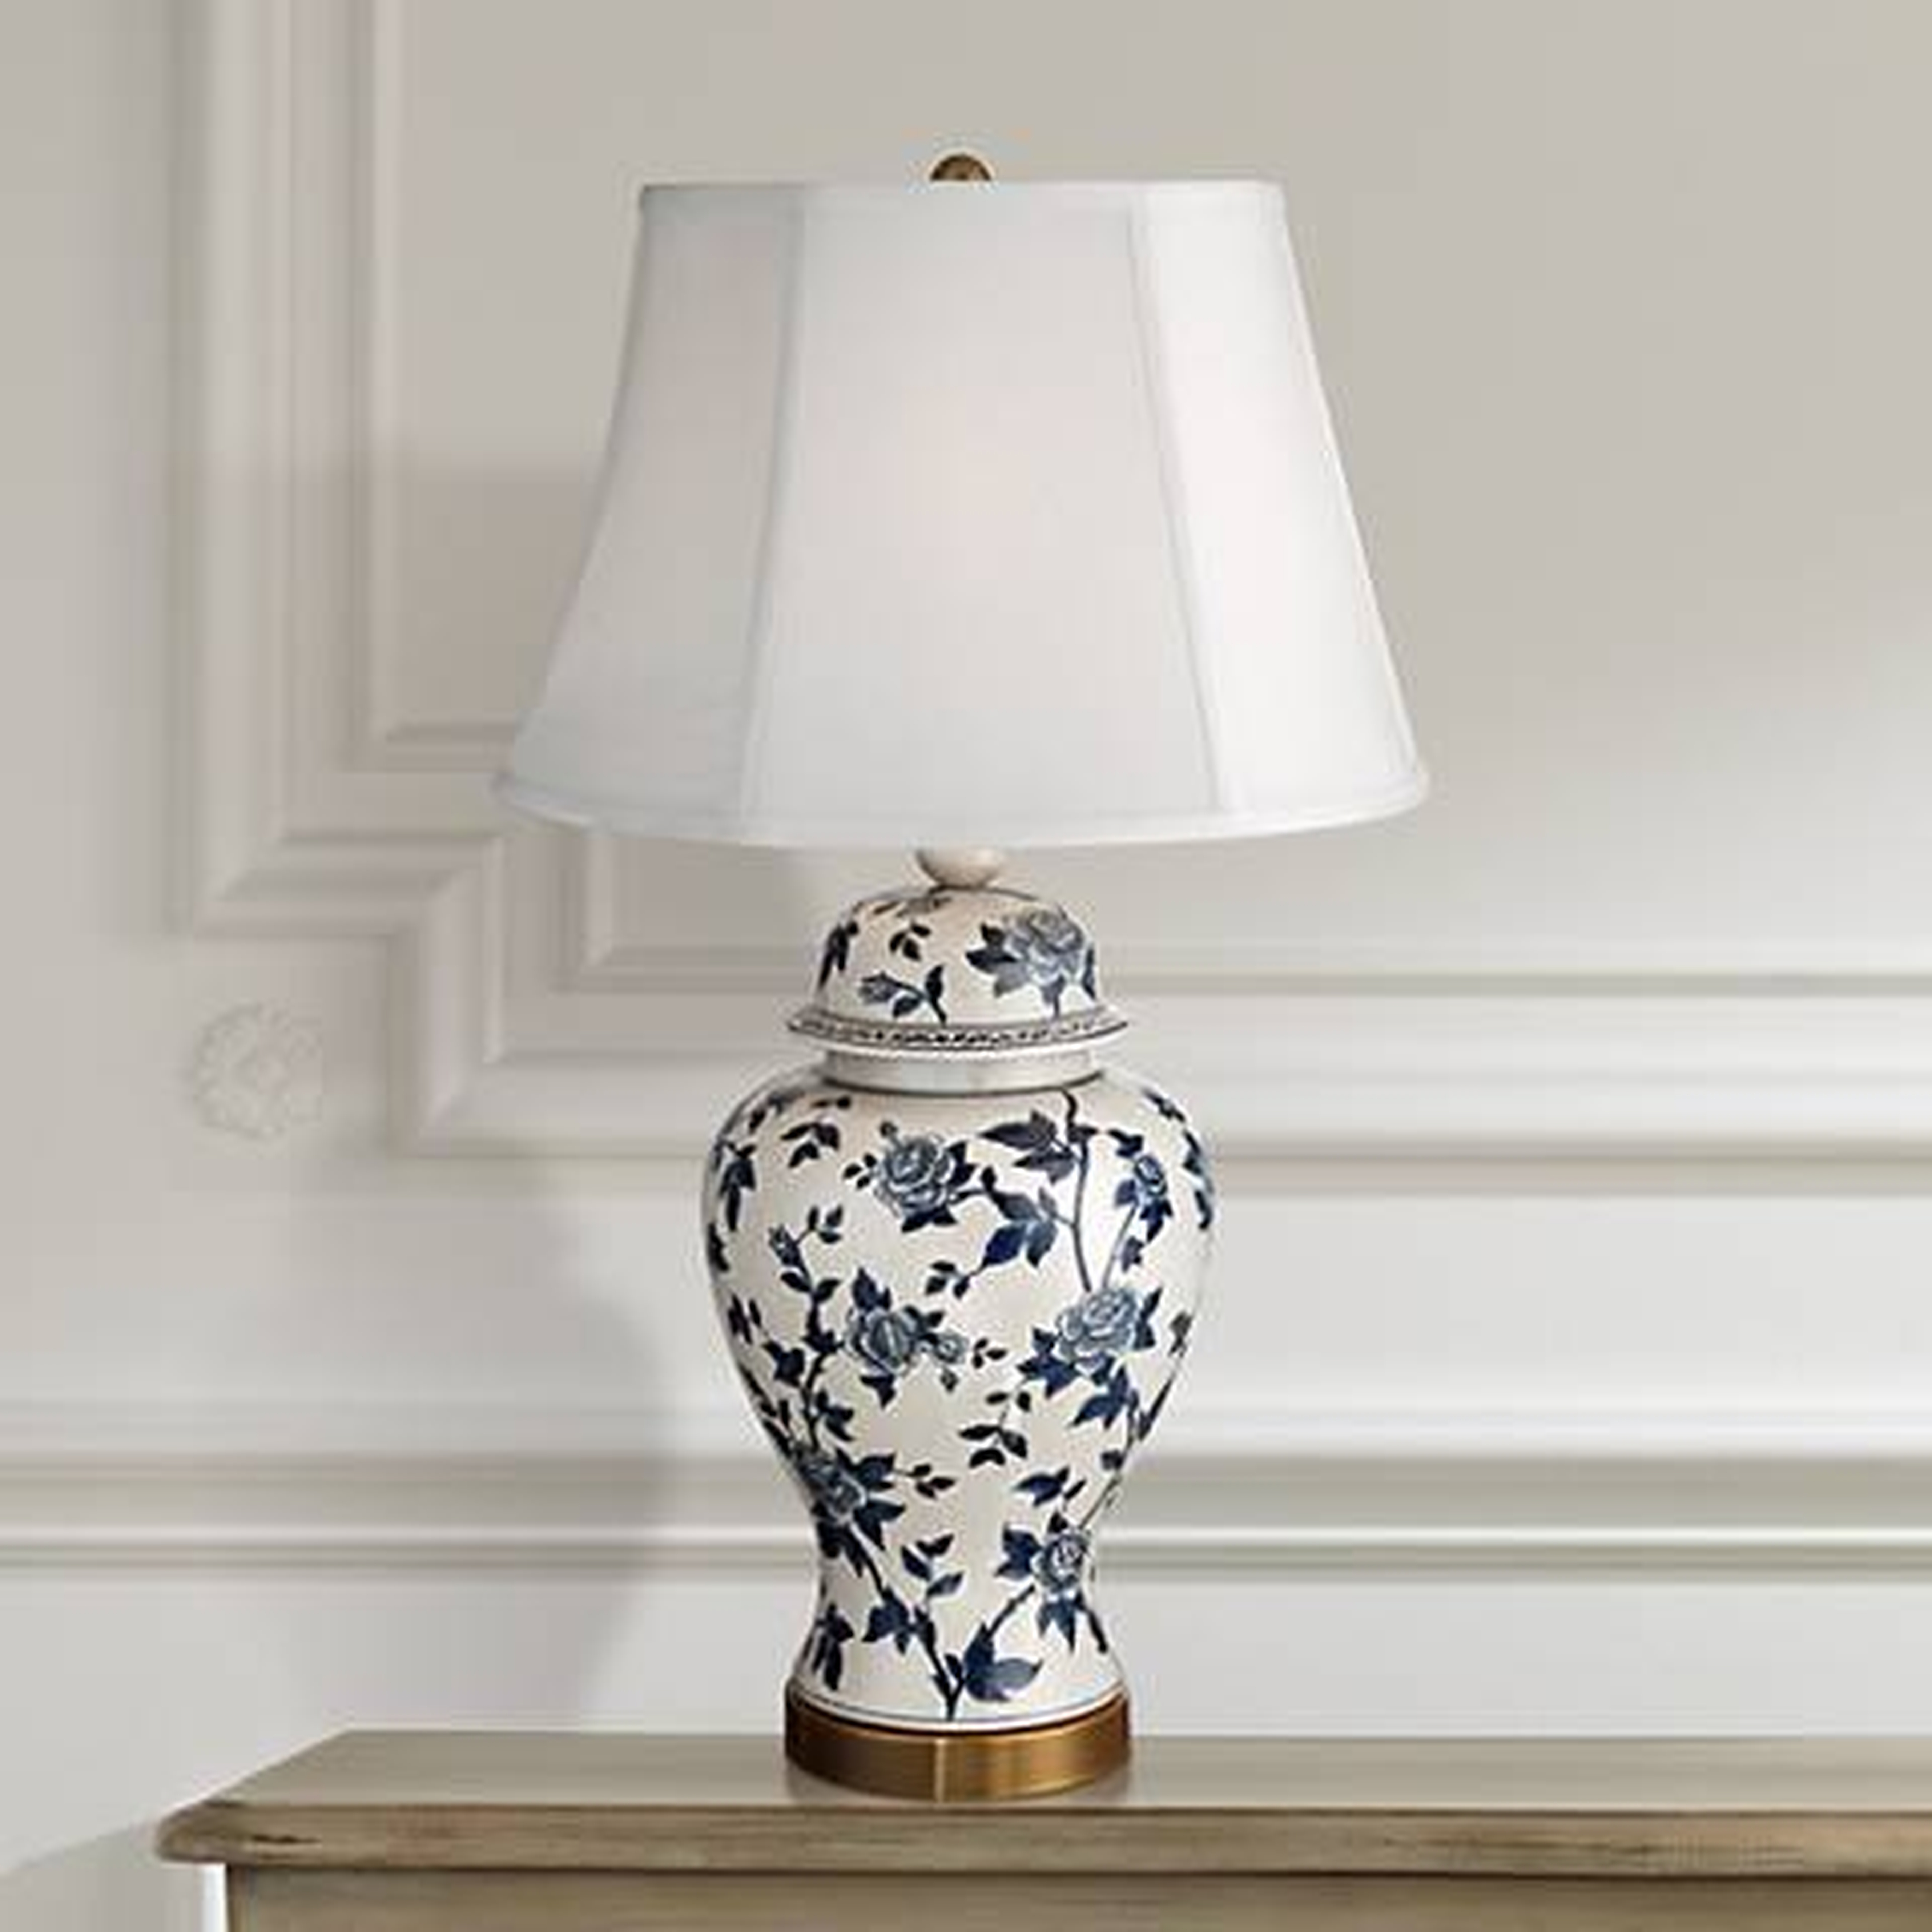 Rose Vine Blue and White Temple Jar Table Lamp - Lamps Plus